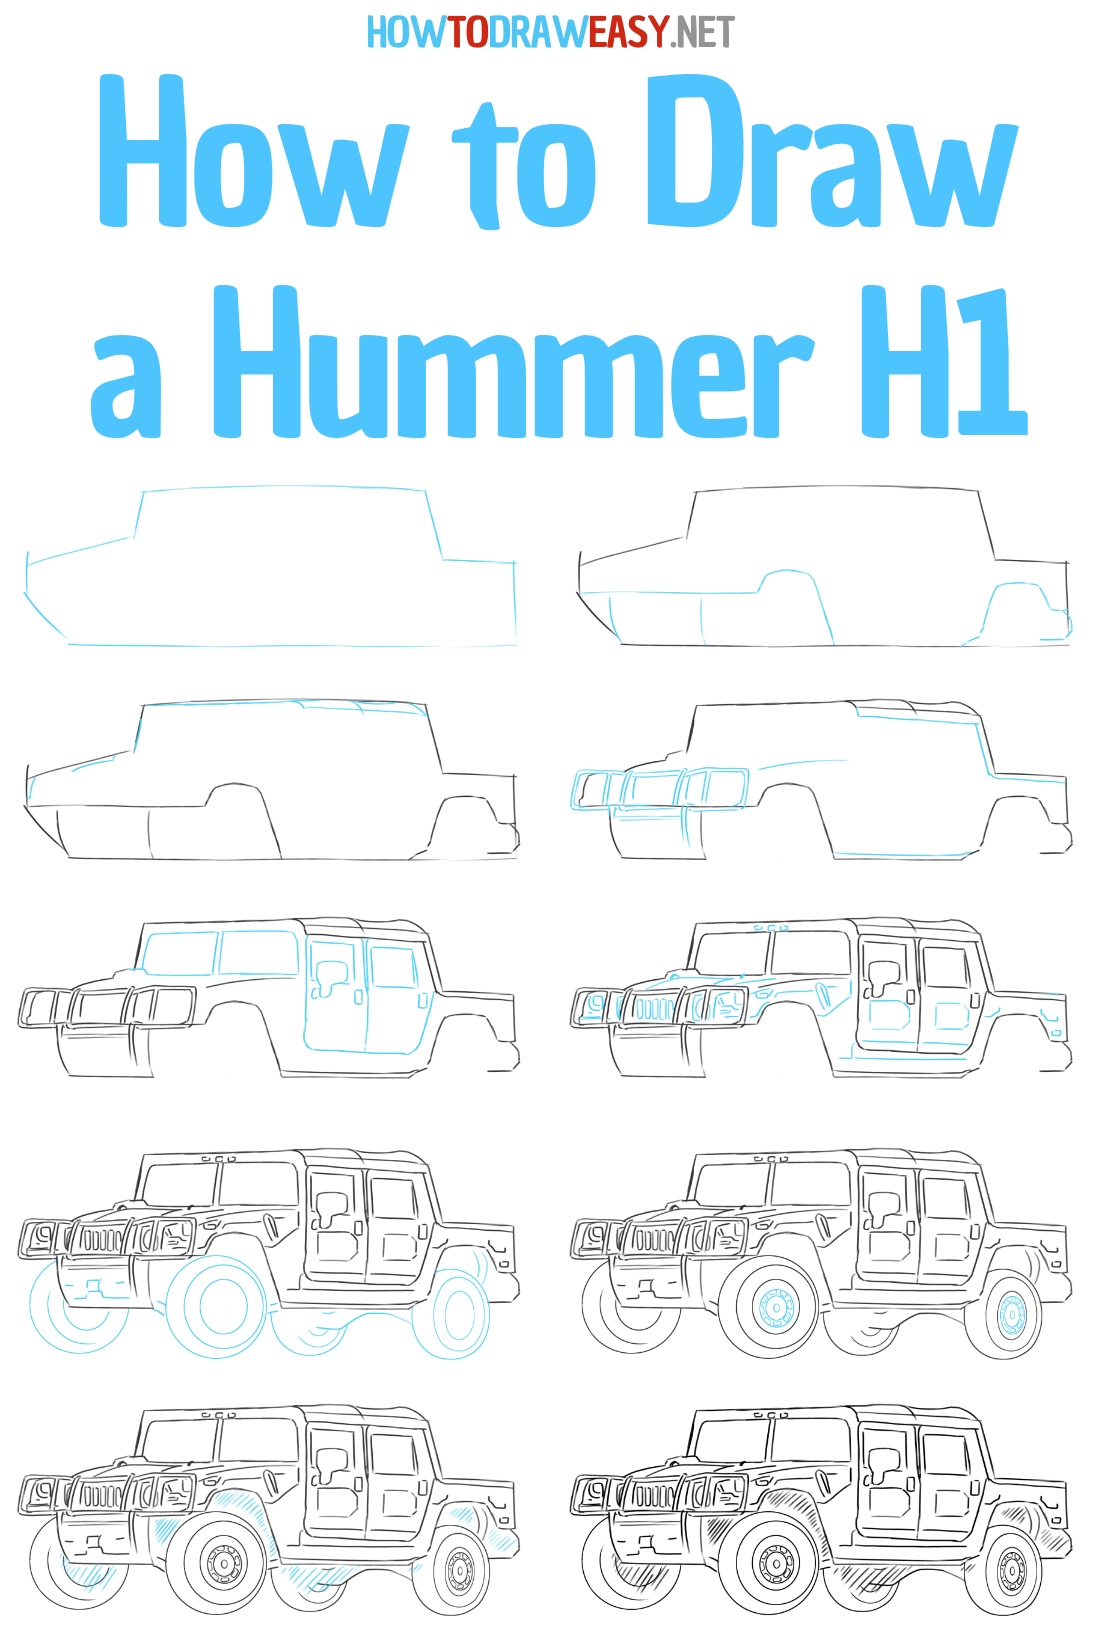 how to draw a hummer H1 step by step